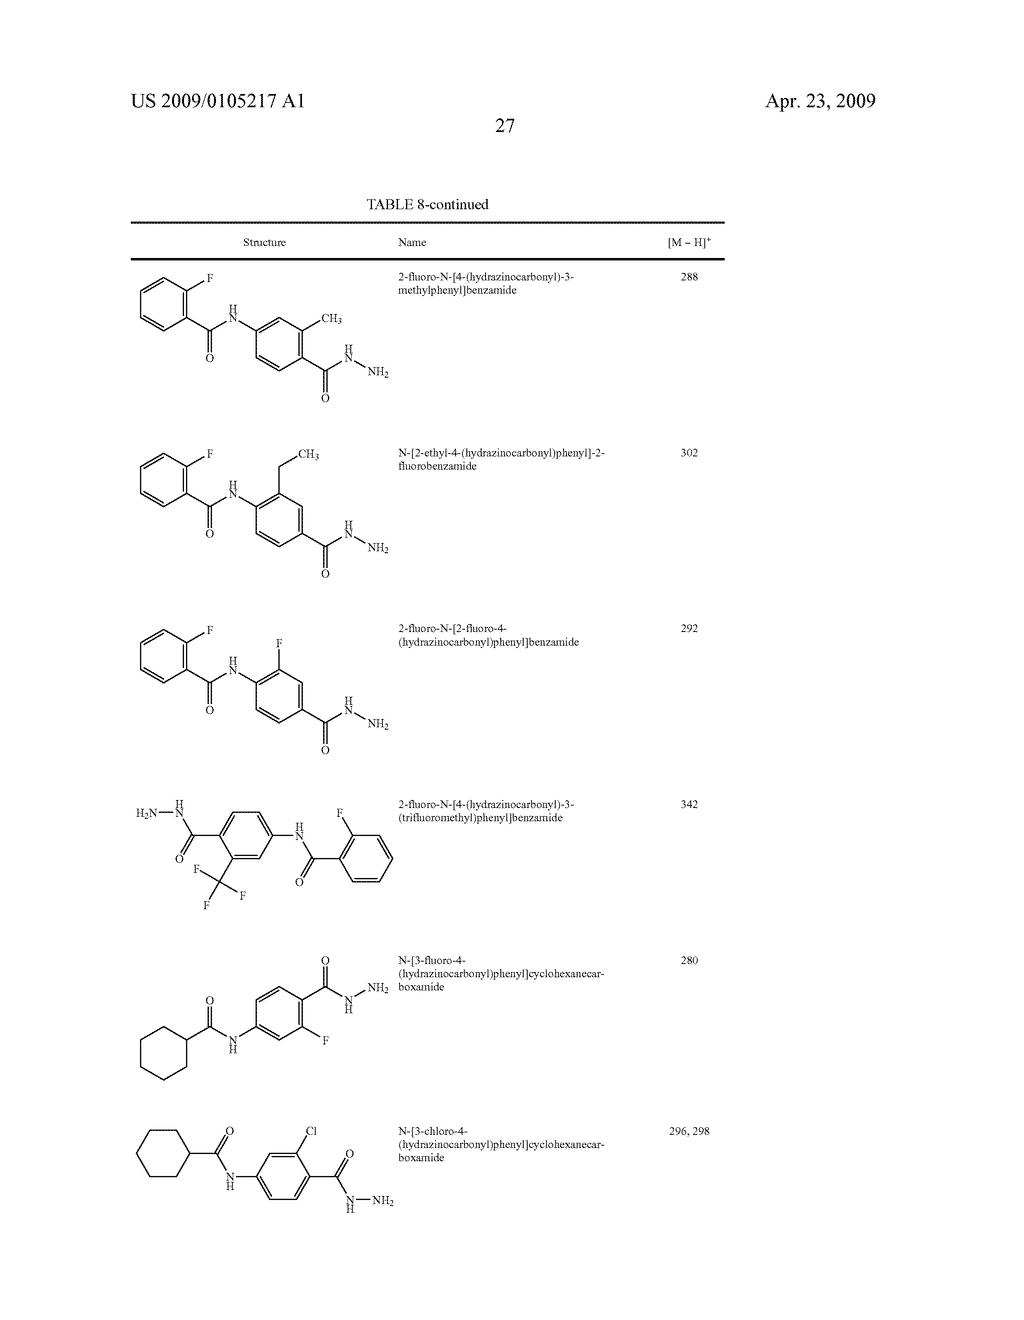 2-PHENYL-5-AMINO-1,3,4-OXADIAZOLES AND THEIR USE AS NICOTINIC ACETYLCHOLINE RECEPTOR LIGANDS - diagram, schematic, and image 28